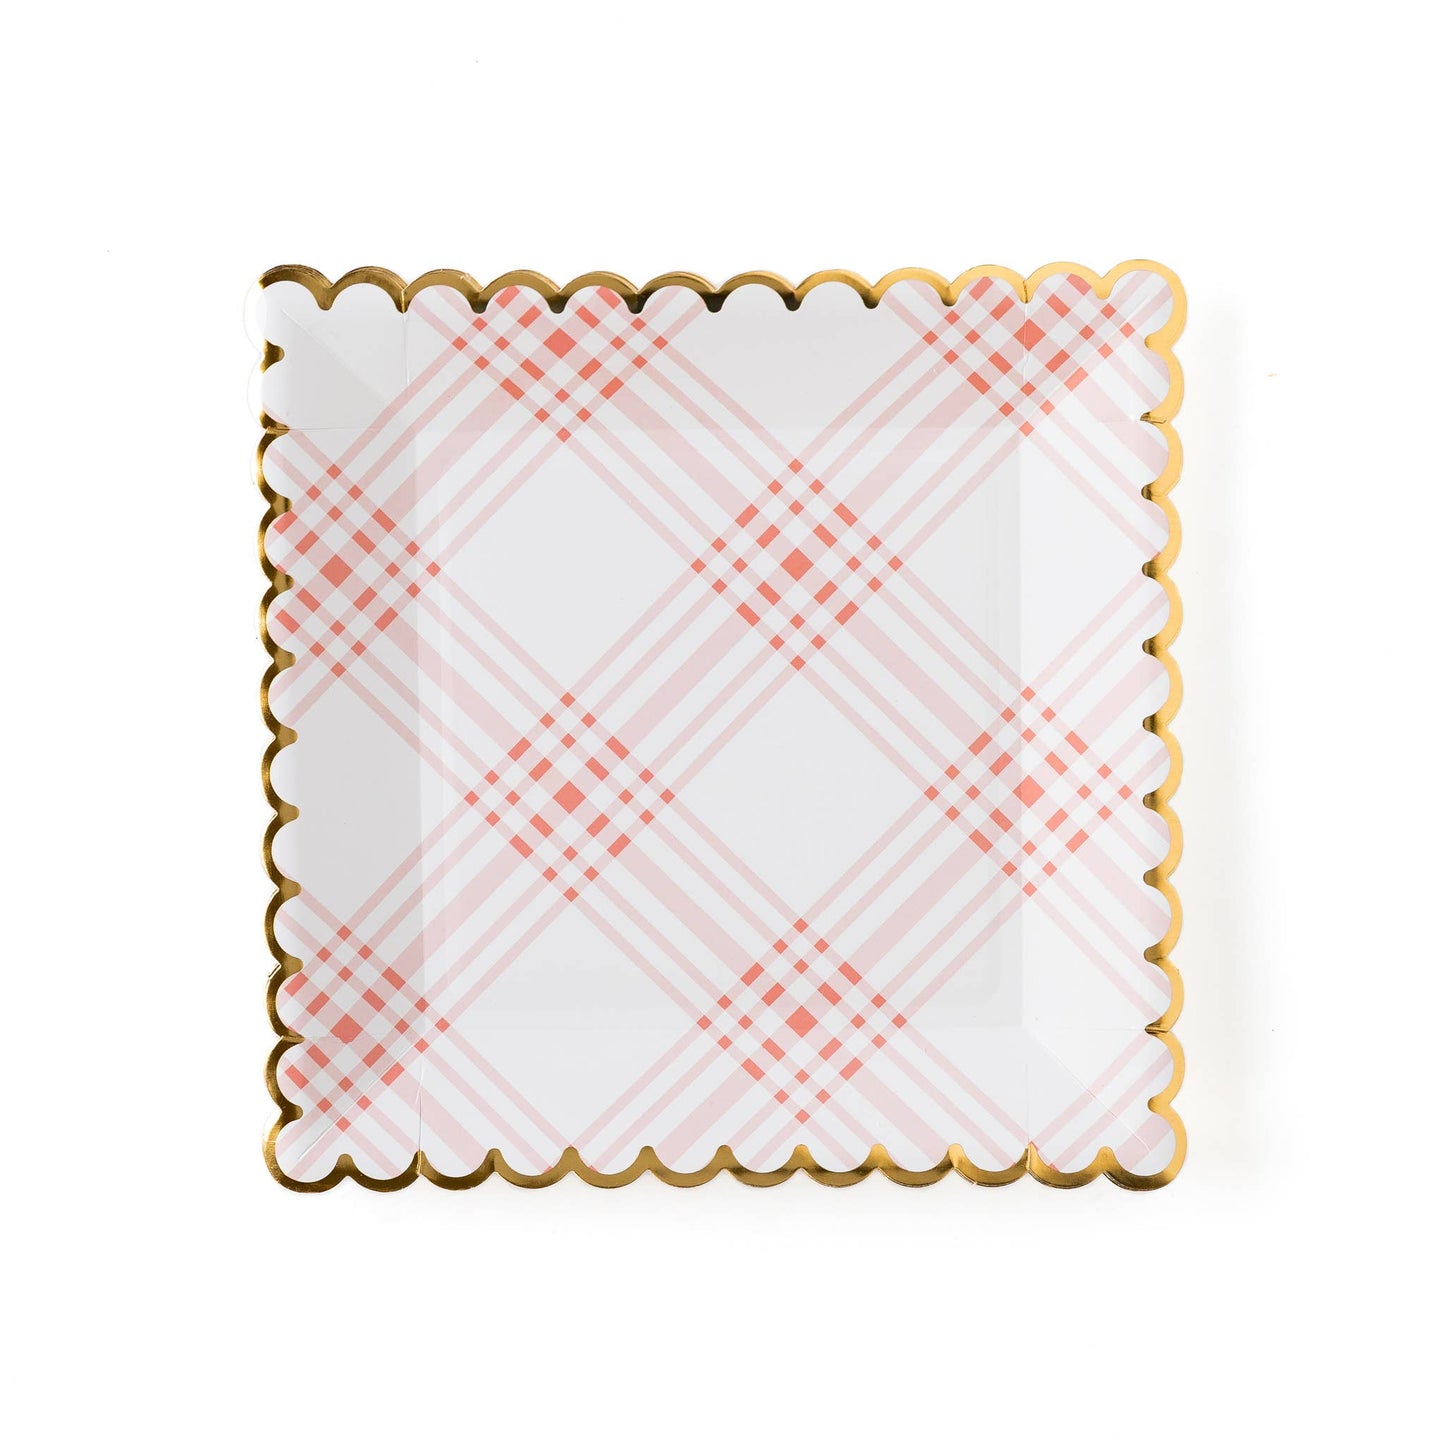 My Mind’s Eye - Garden Party 9" Scalloped Plaid Plate